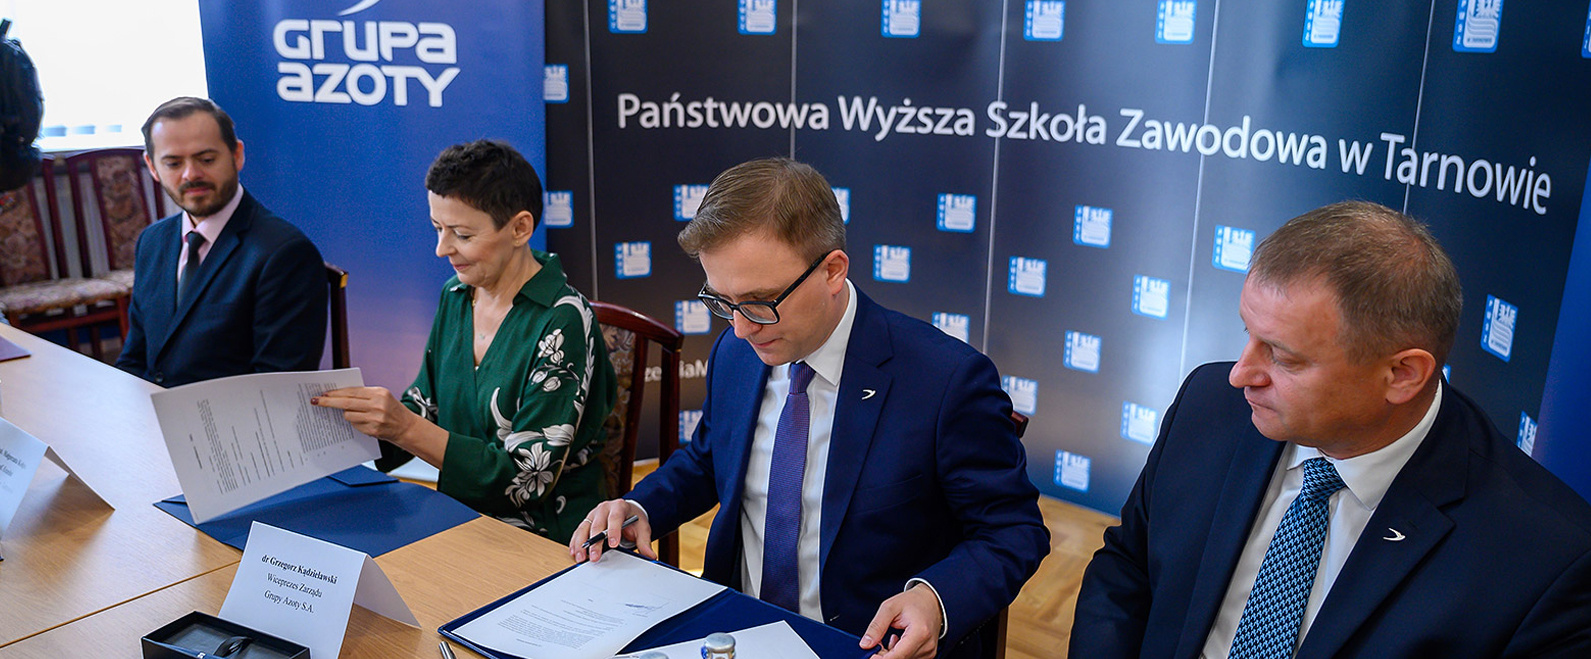 Grupa Azoty S.A. has signed a cooperation agreement with the University of Applied Sciences in Tarnów